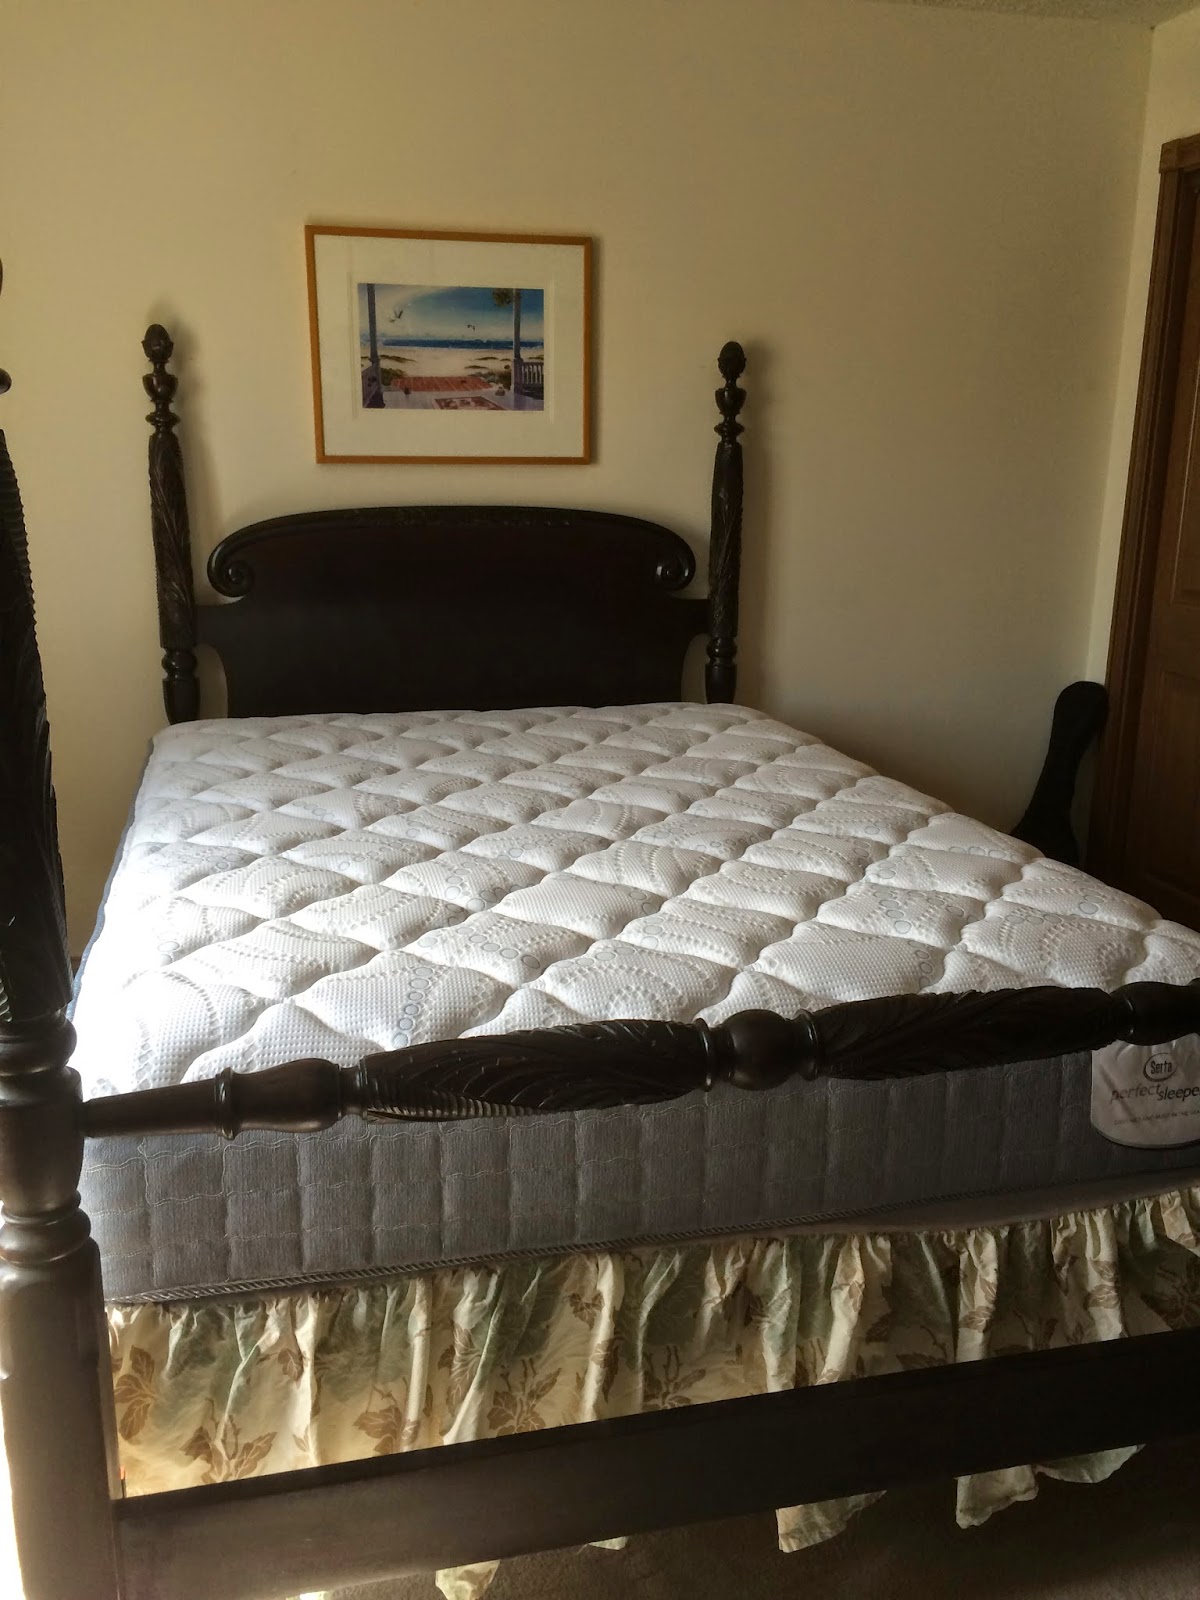 Converting Antique Bed To Queen Mattress, How To Turn A Full Size Bed Into Queen